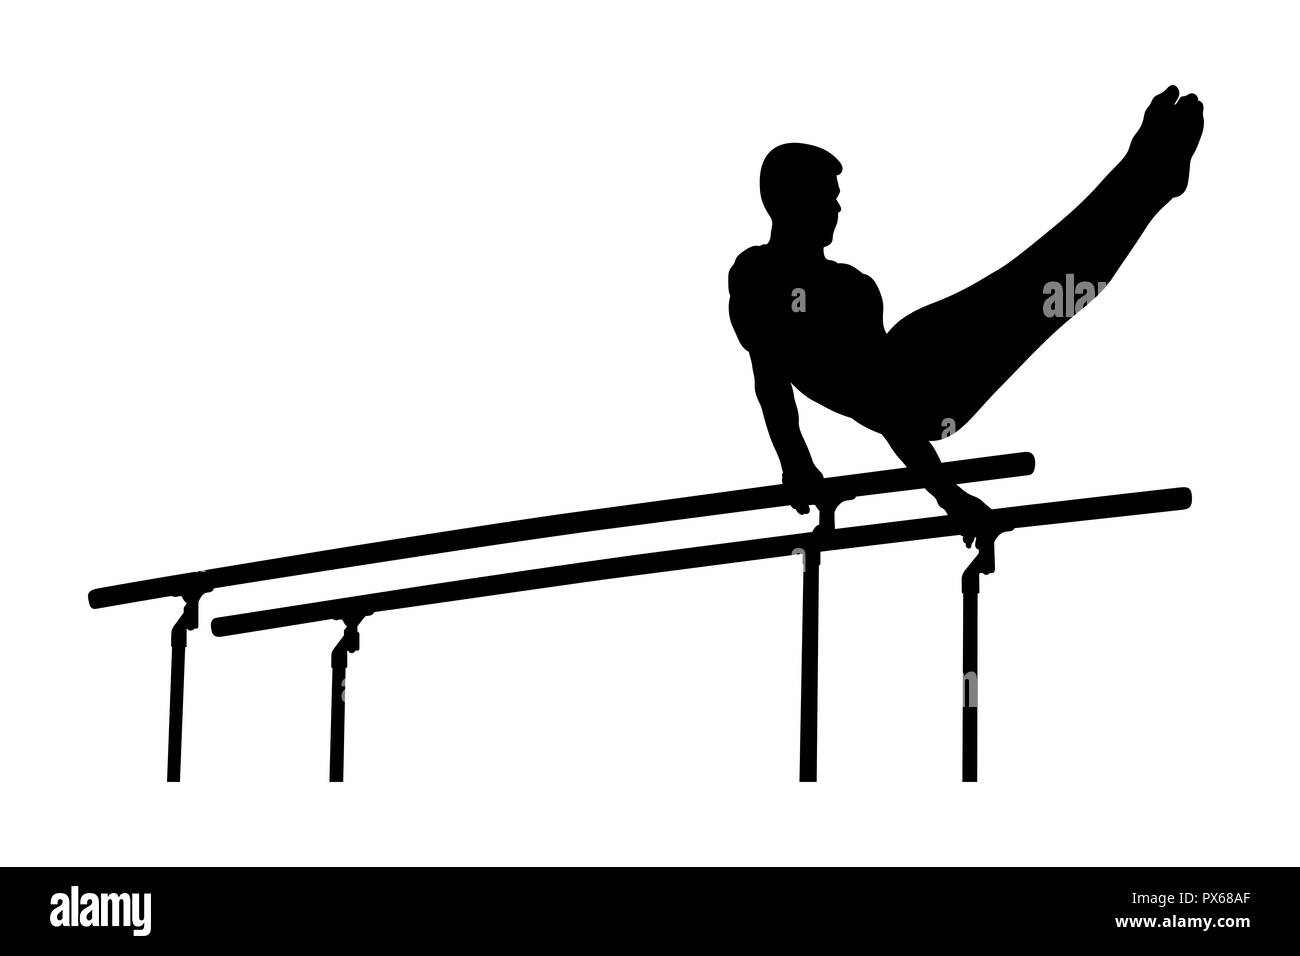 parallel bars male gymnast in artistic gymnastics Stock Photo